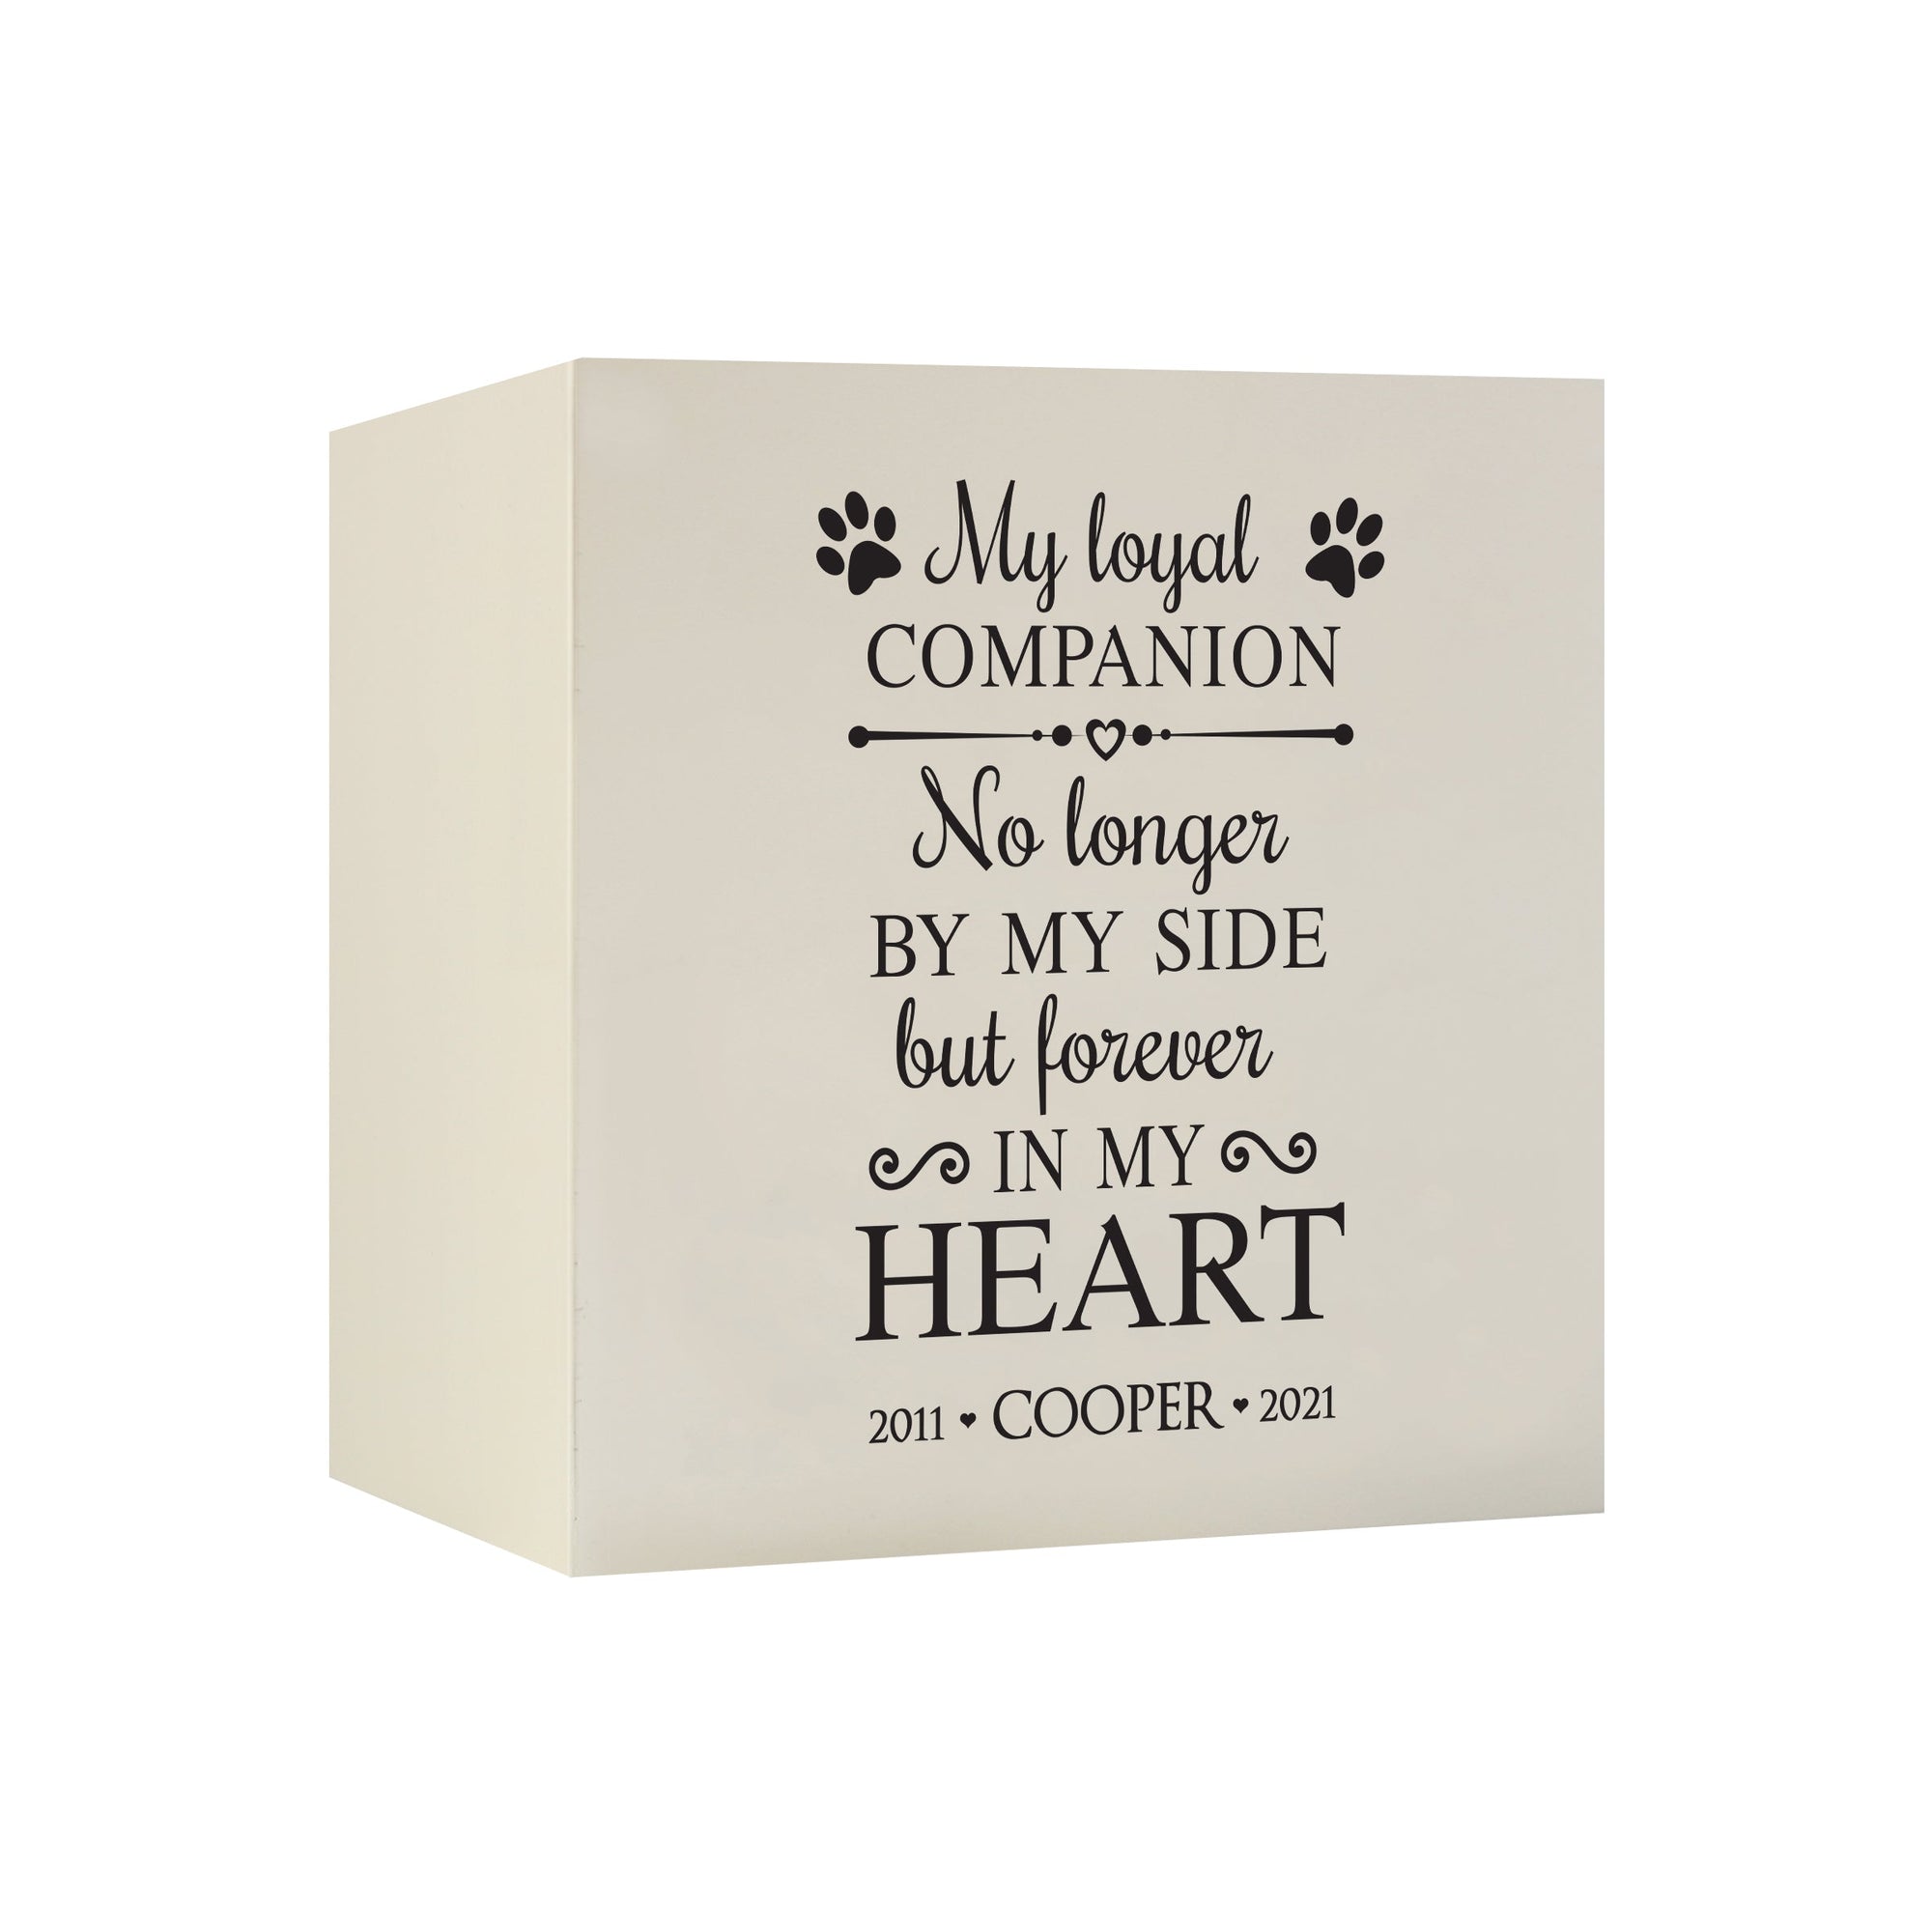 Pet Memorial Shadow Box Cremation Urn for Dog or Cat - My Loyal Companion